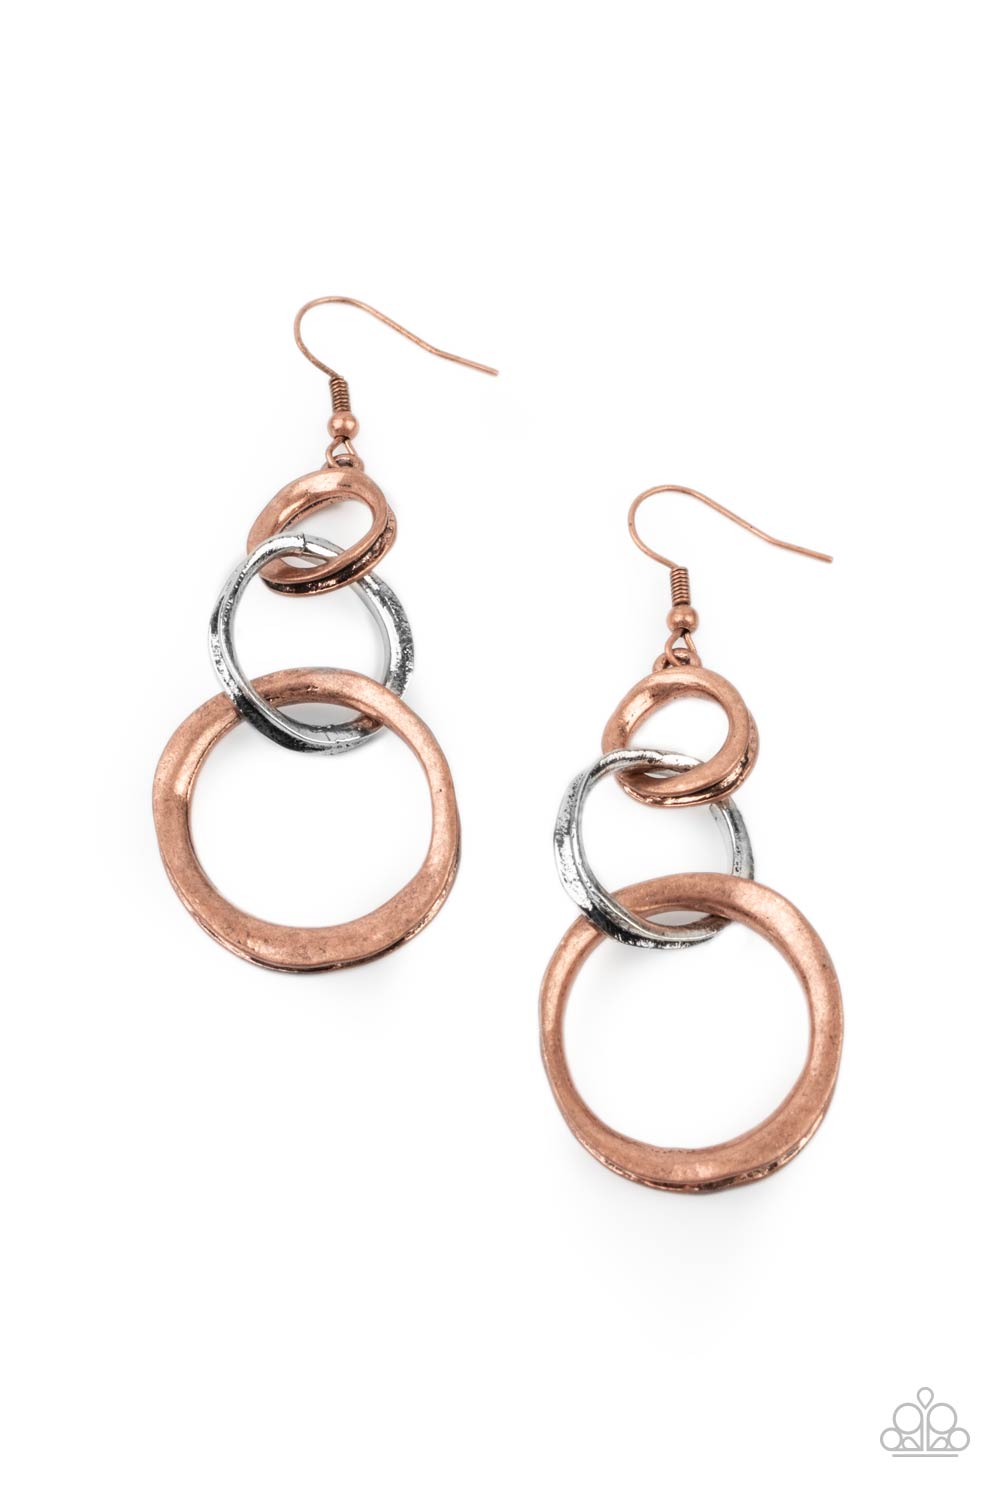 Harmoniously Handcrafted - Copper - Bella Bling by Natalie